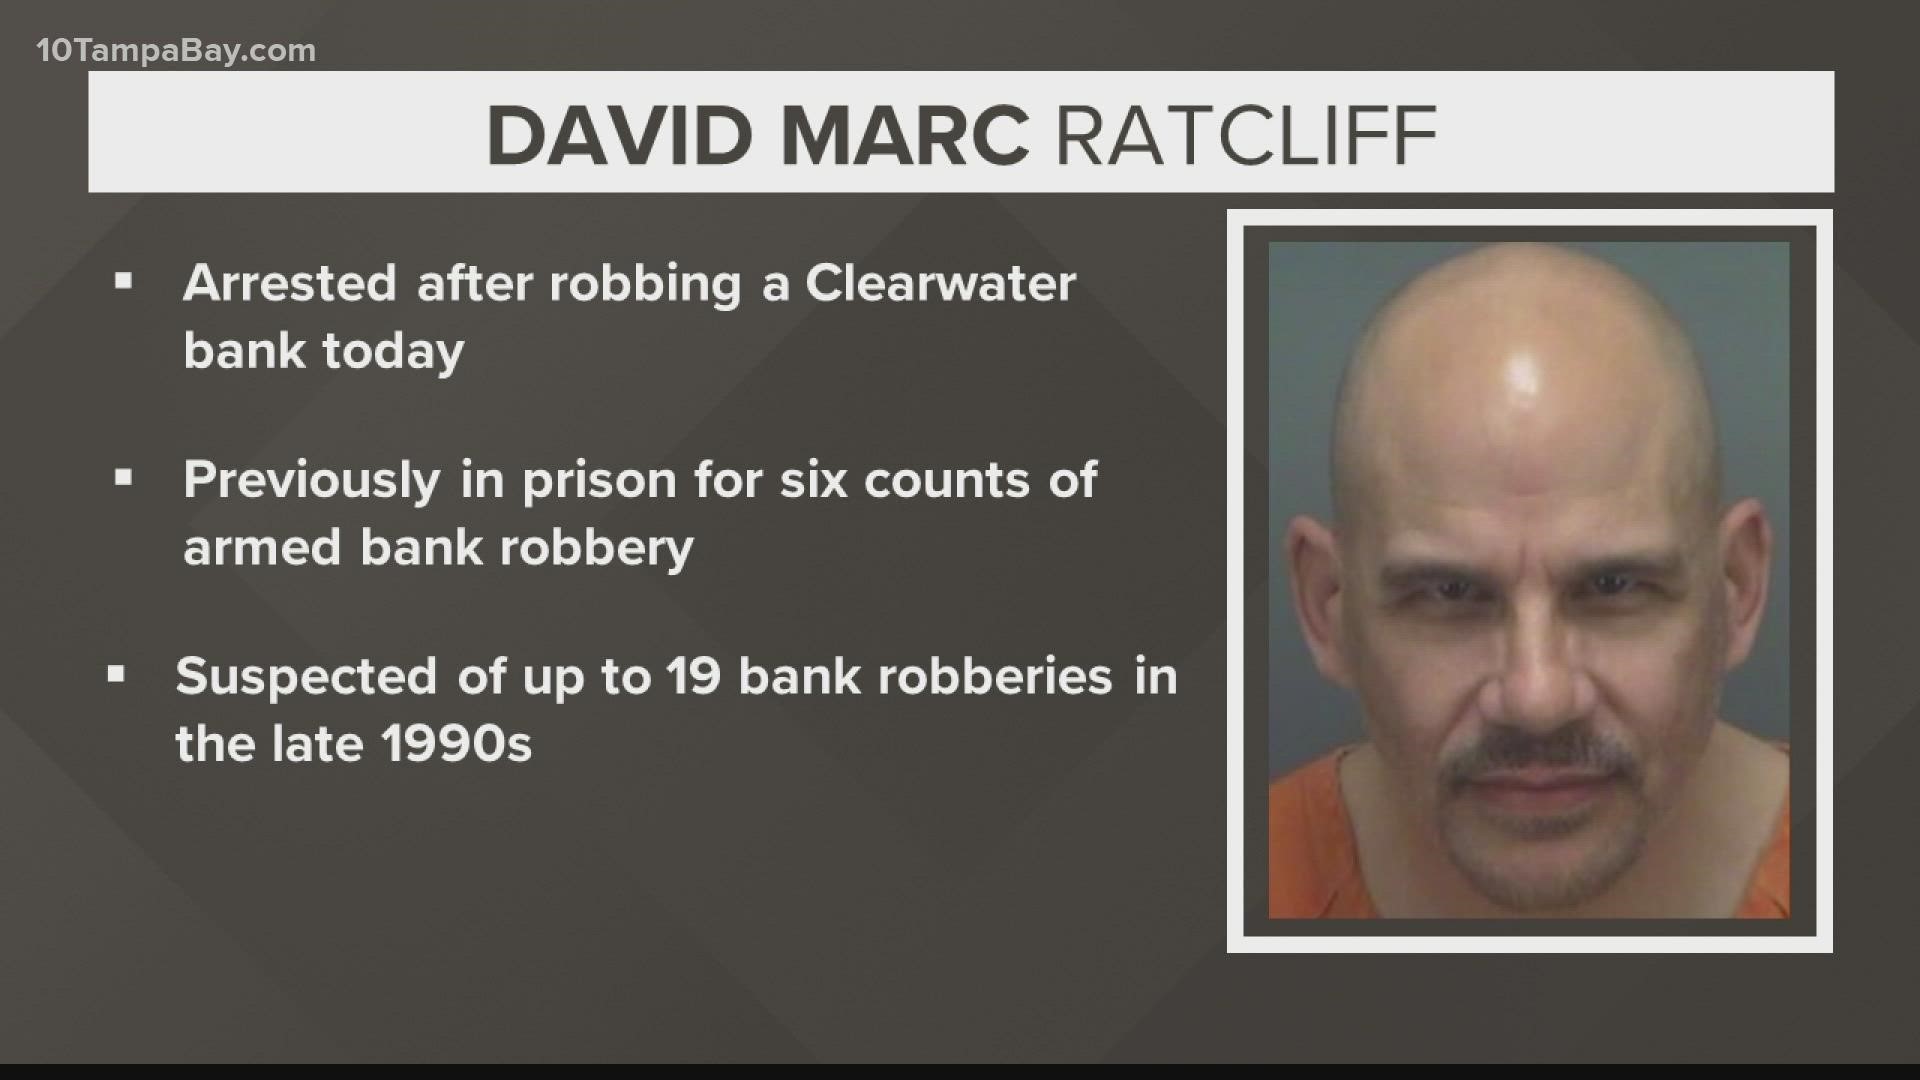 He was suspected of as many as 19 bank robberies from two decades ago, authorities say.